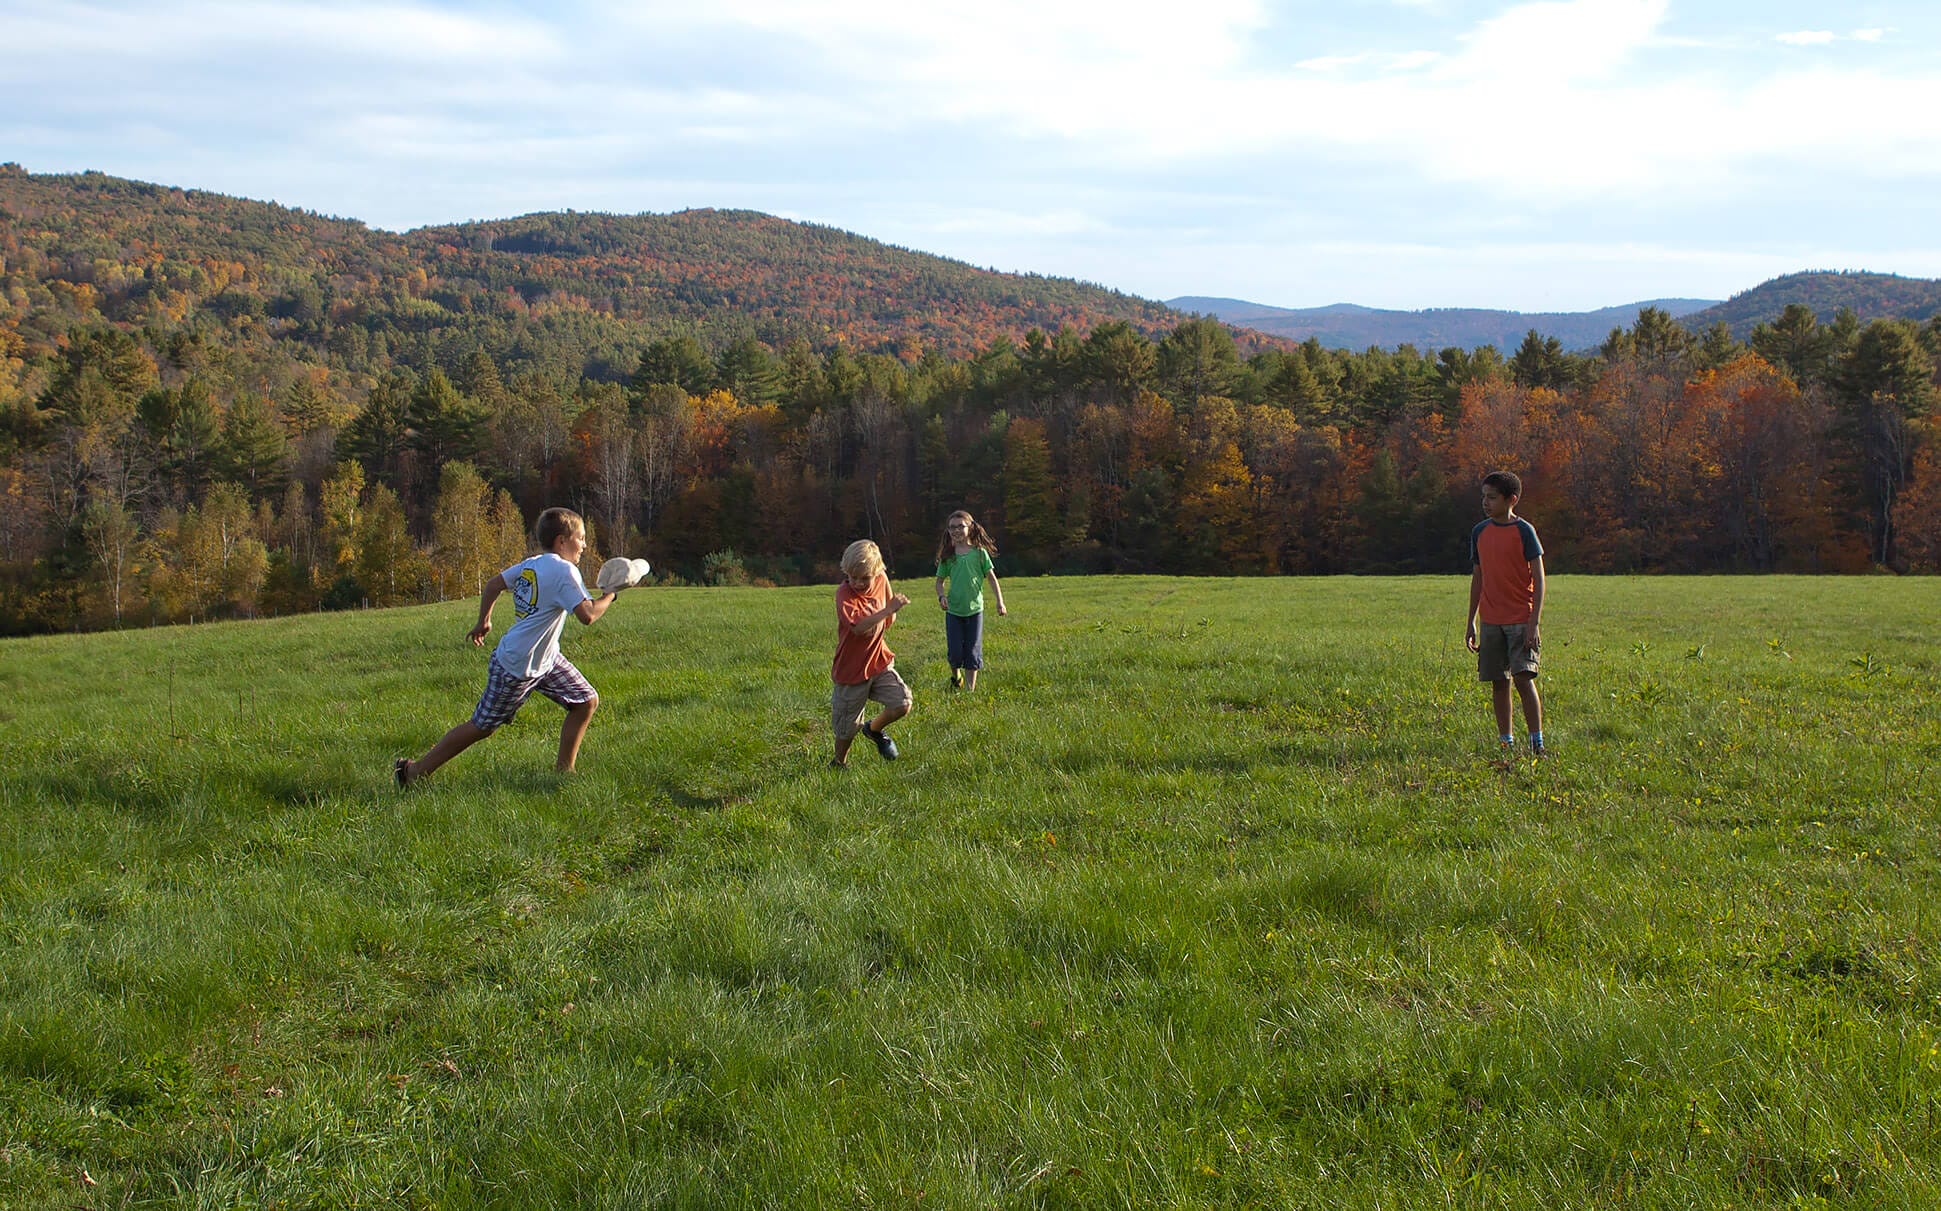 A group of people playing frisbee in a field.